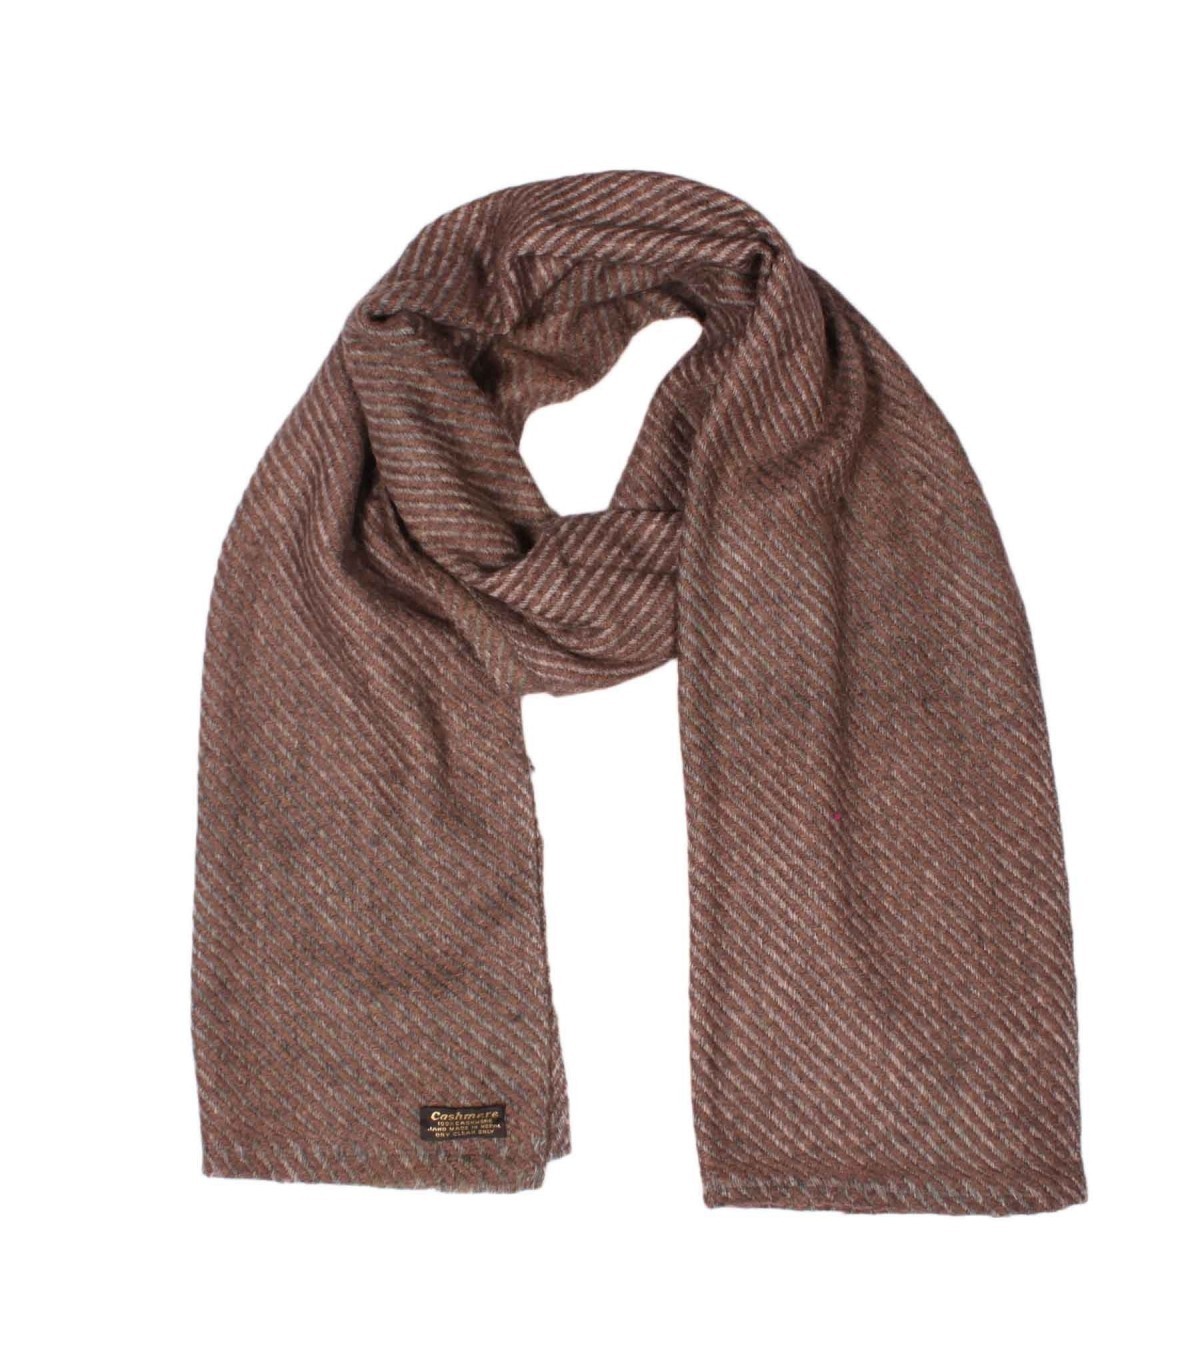 Diagonal Patterned Cashmere Brown Scarf| Pashmina scarf for men and women